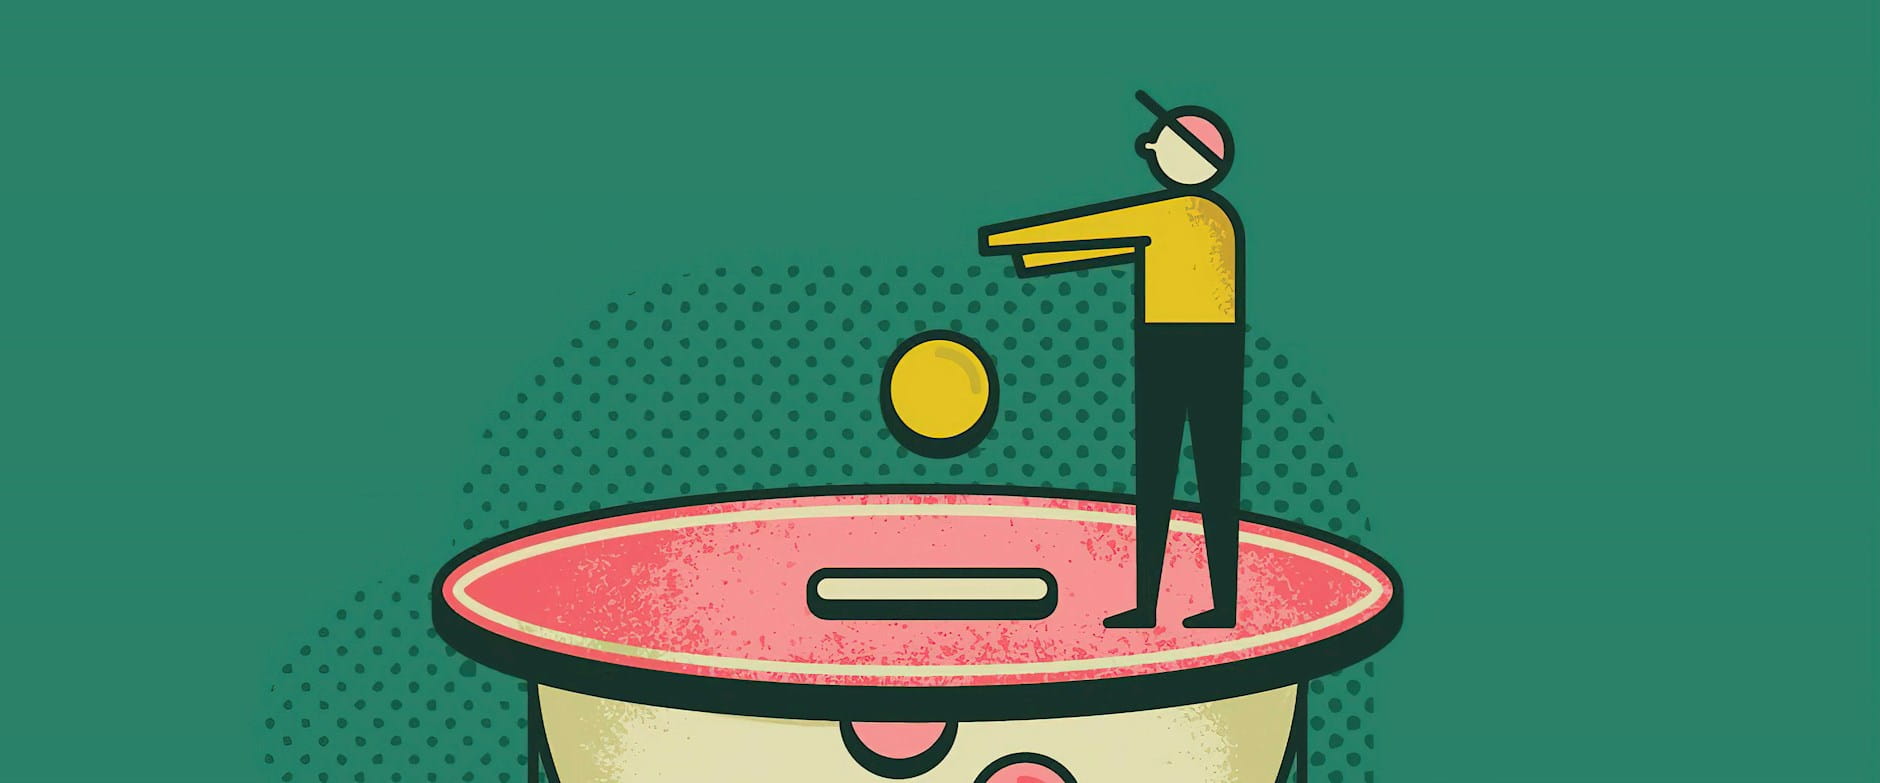 Illustration of person dropping coin in change bucket